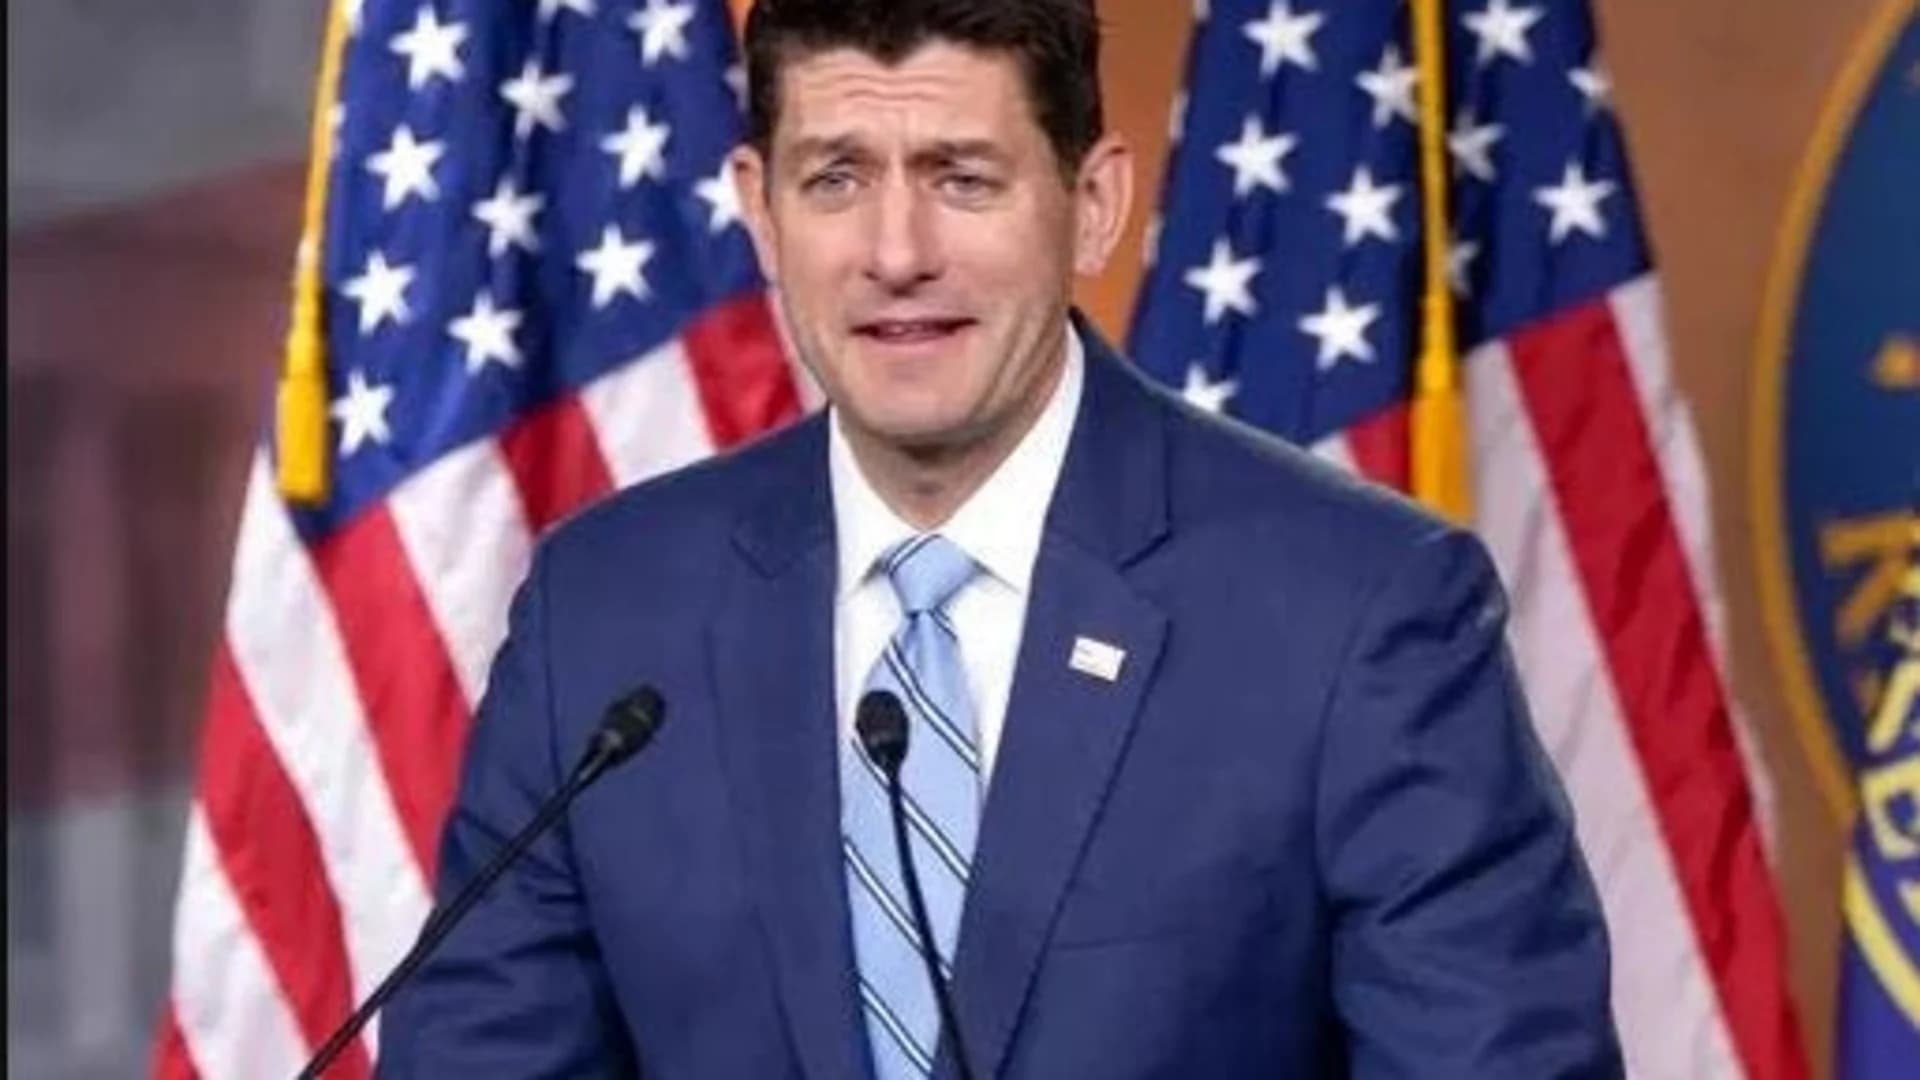 Speaker Ryan not comfortable with separating parents, kids at border